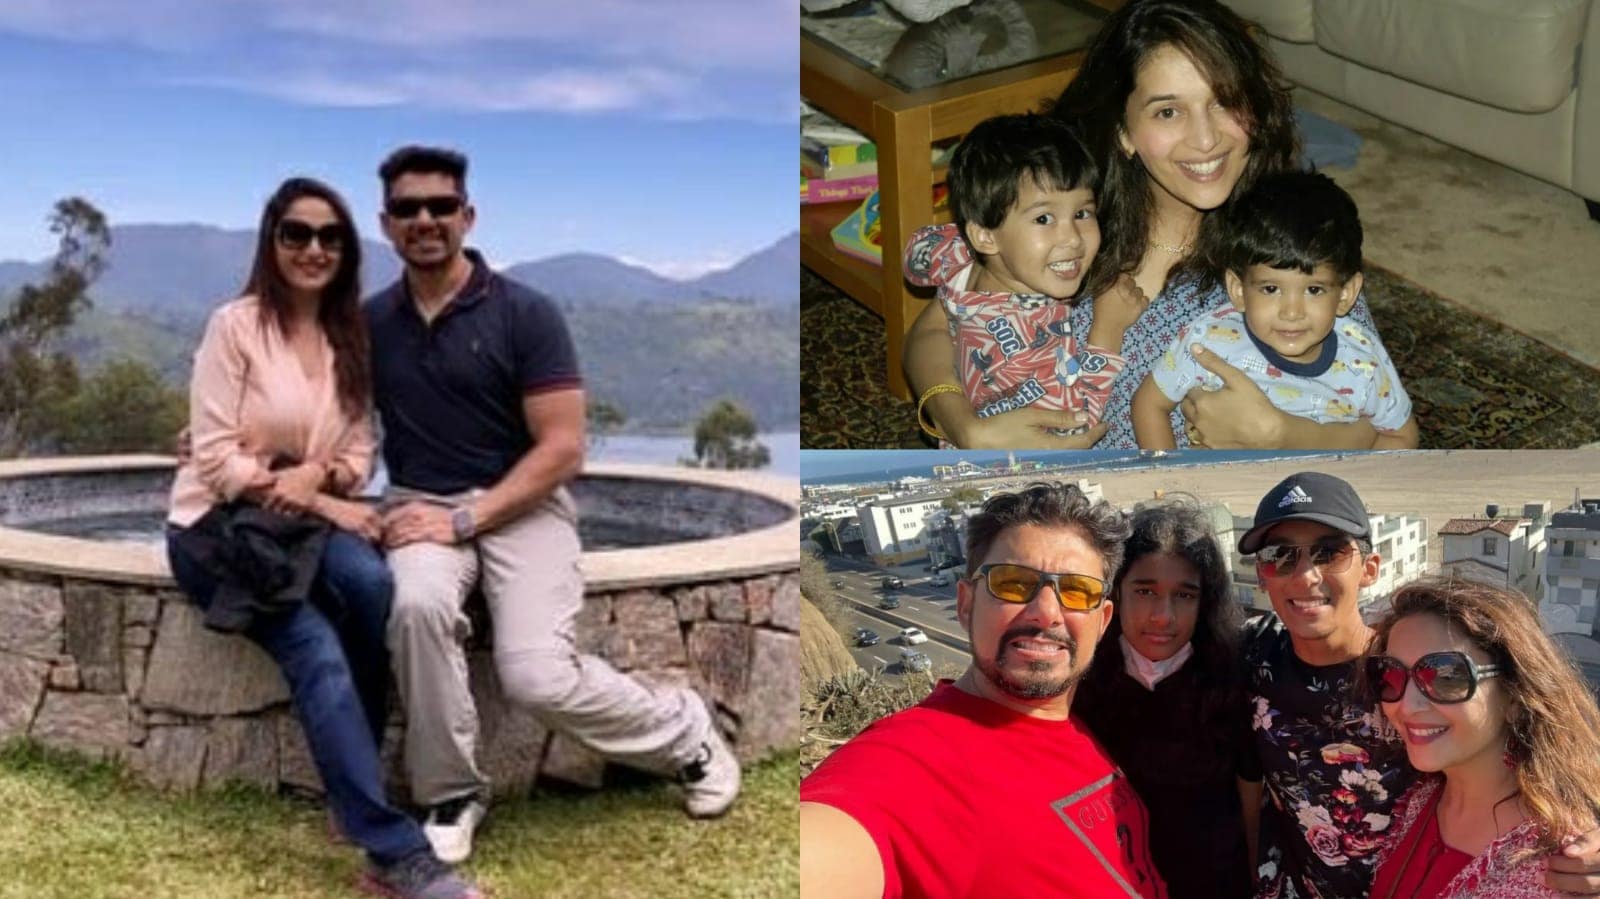 Glimpses of Madhur's life abroad shared by her on her social media.